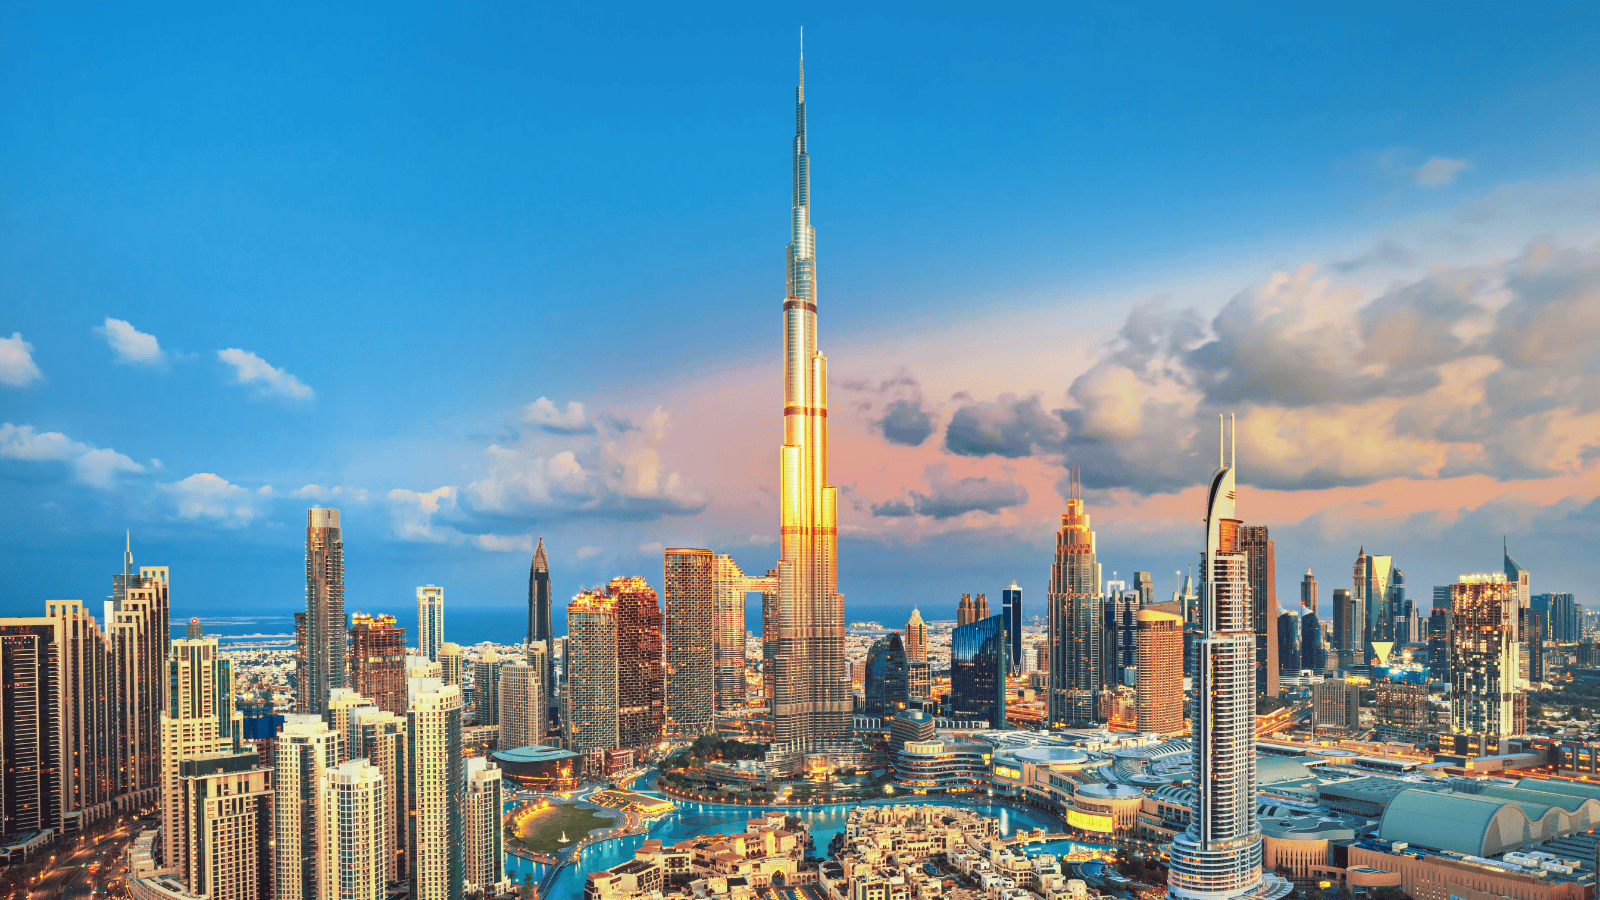 <p>Dubai has made a conscious effort to ensure all visitors have an equally positive experience. Major tourist destinations like the Burj Khalifa, Dubai Mall, and the Dubai Marina area have special entrances and facilities for those with mobility concerns. </p><p>Dubai’s public transportation system, including the Dubai Metro, buses, and taxis, offers options for individuals with disabilities. Moreover, several hotels in Dubai provide accessible rooms and facilities.</p>